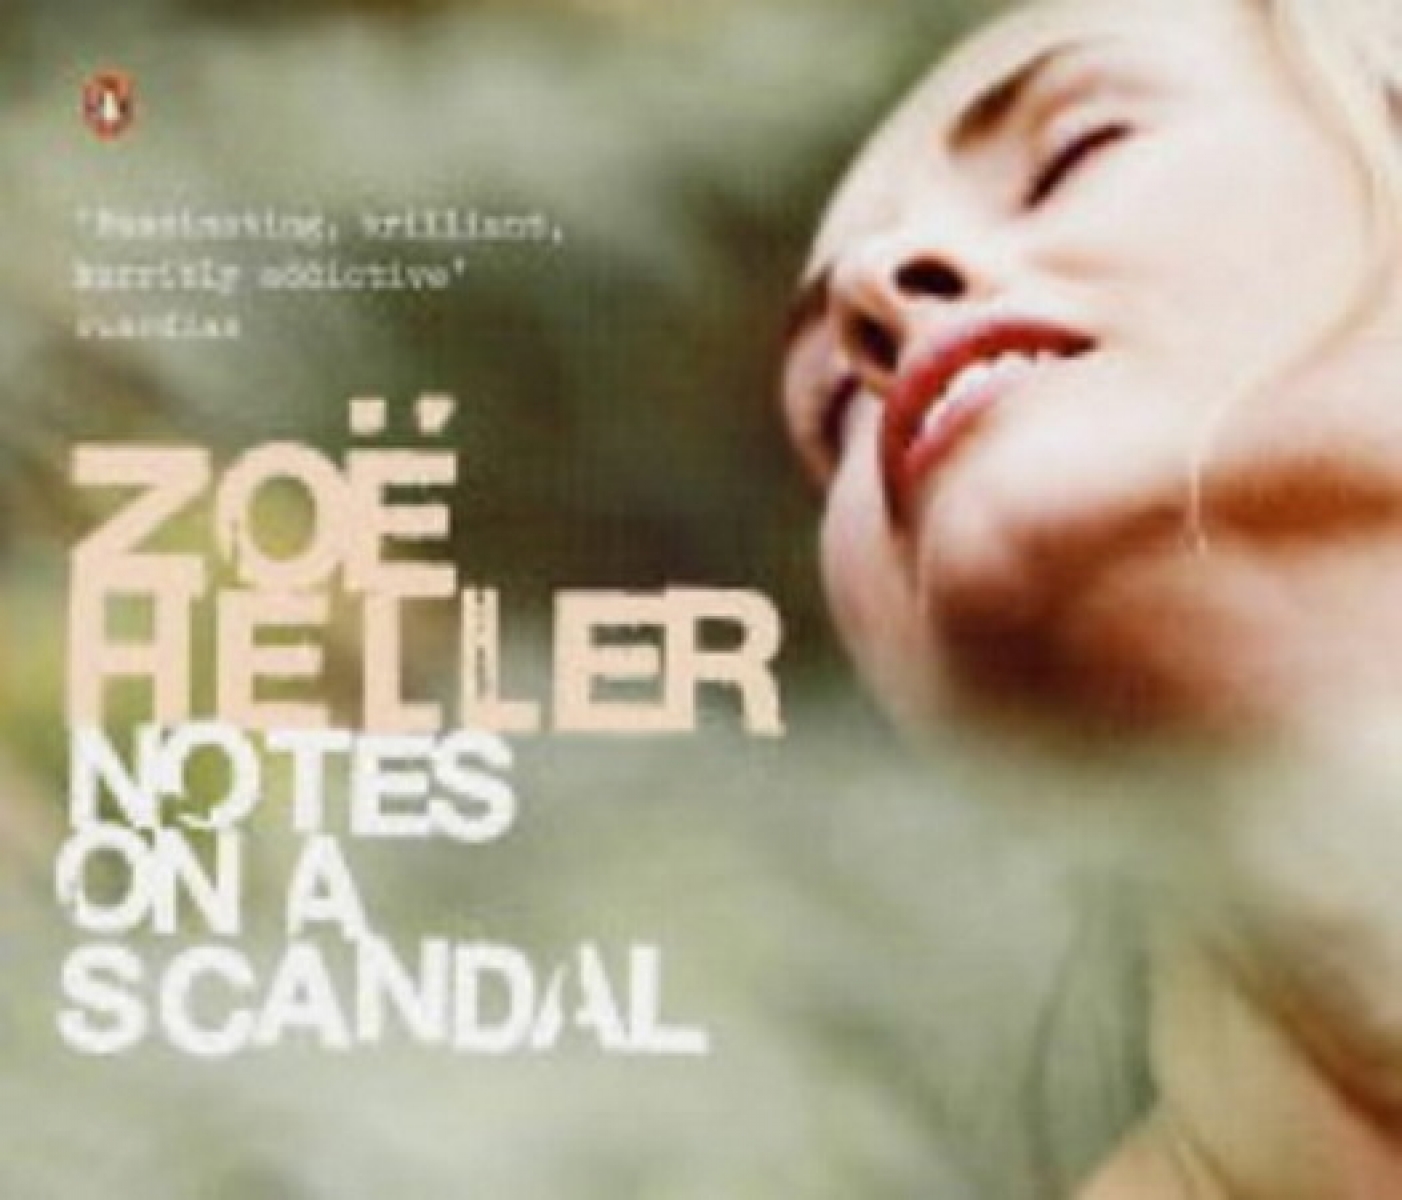 Heller, Zoe Notes on a Scandal. Audio CD 